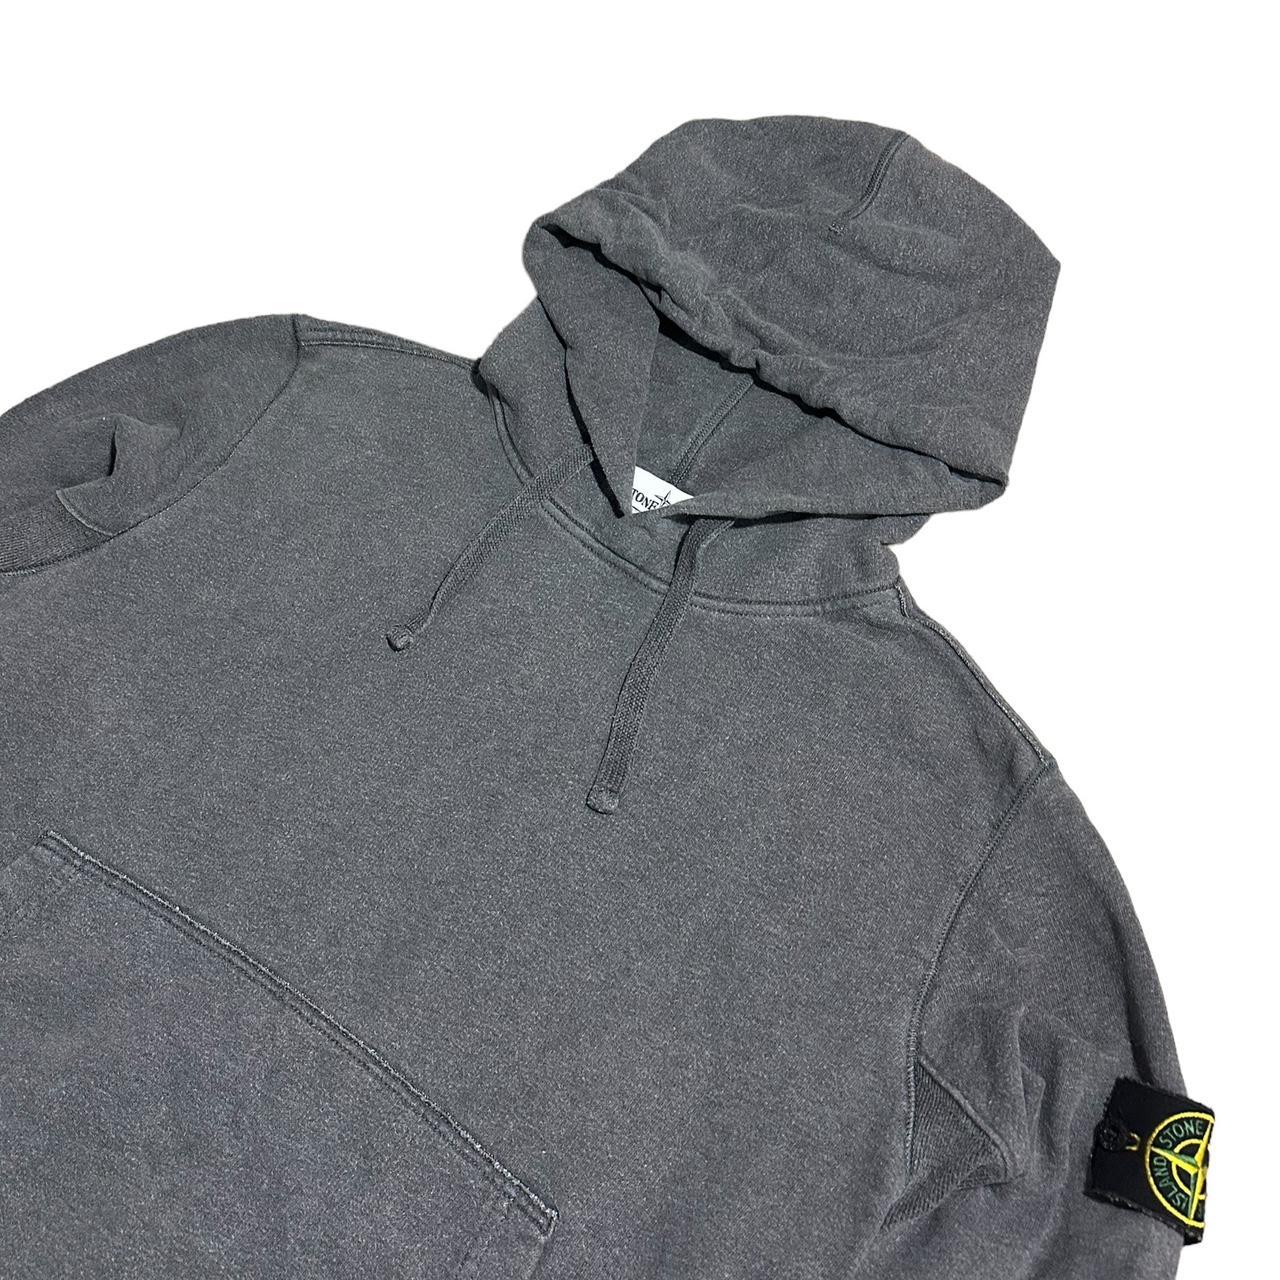 Stone Island Pullover Hoodie with Drawstrings